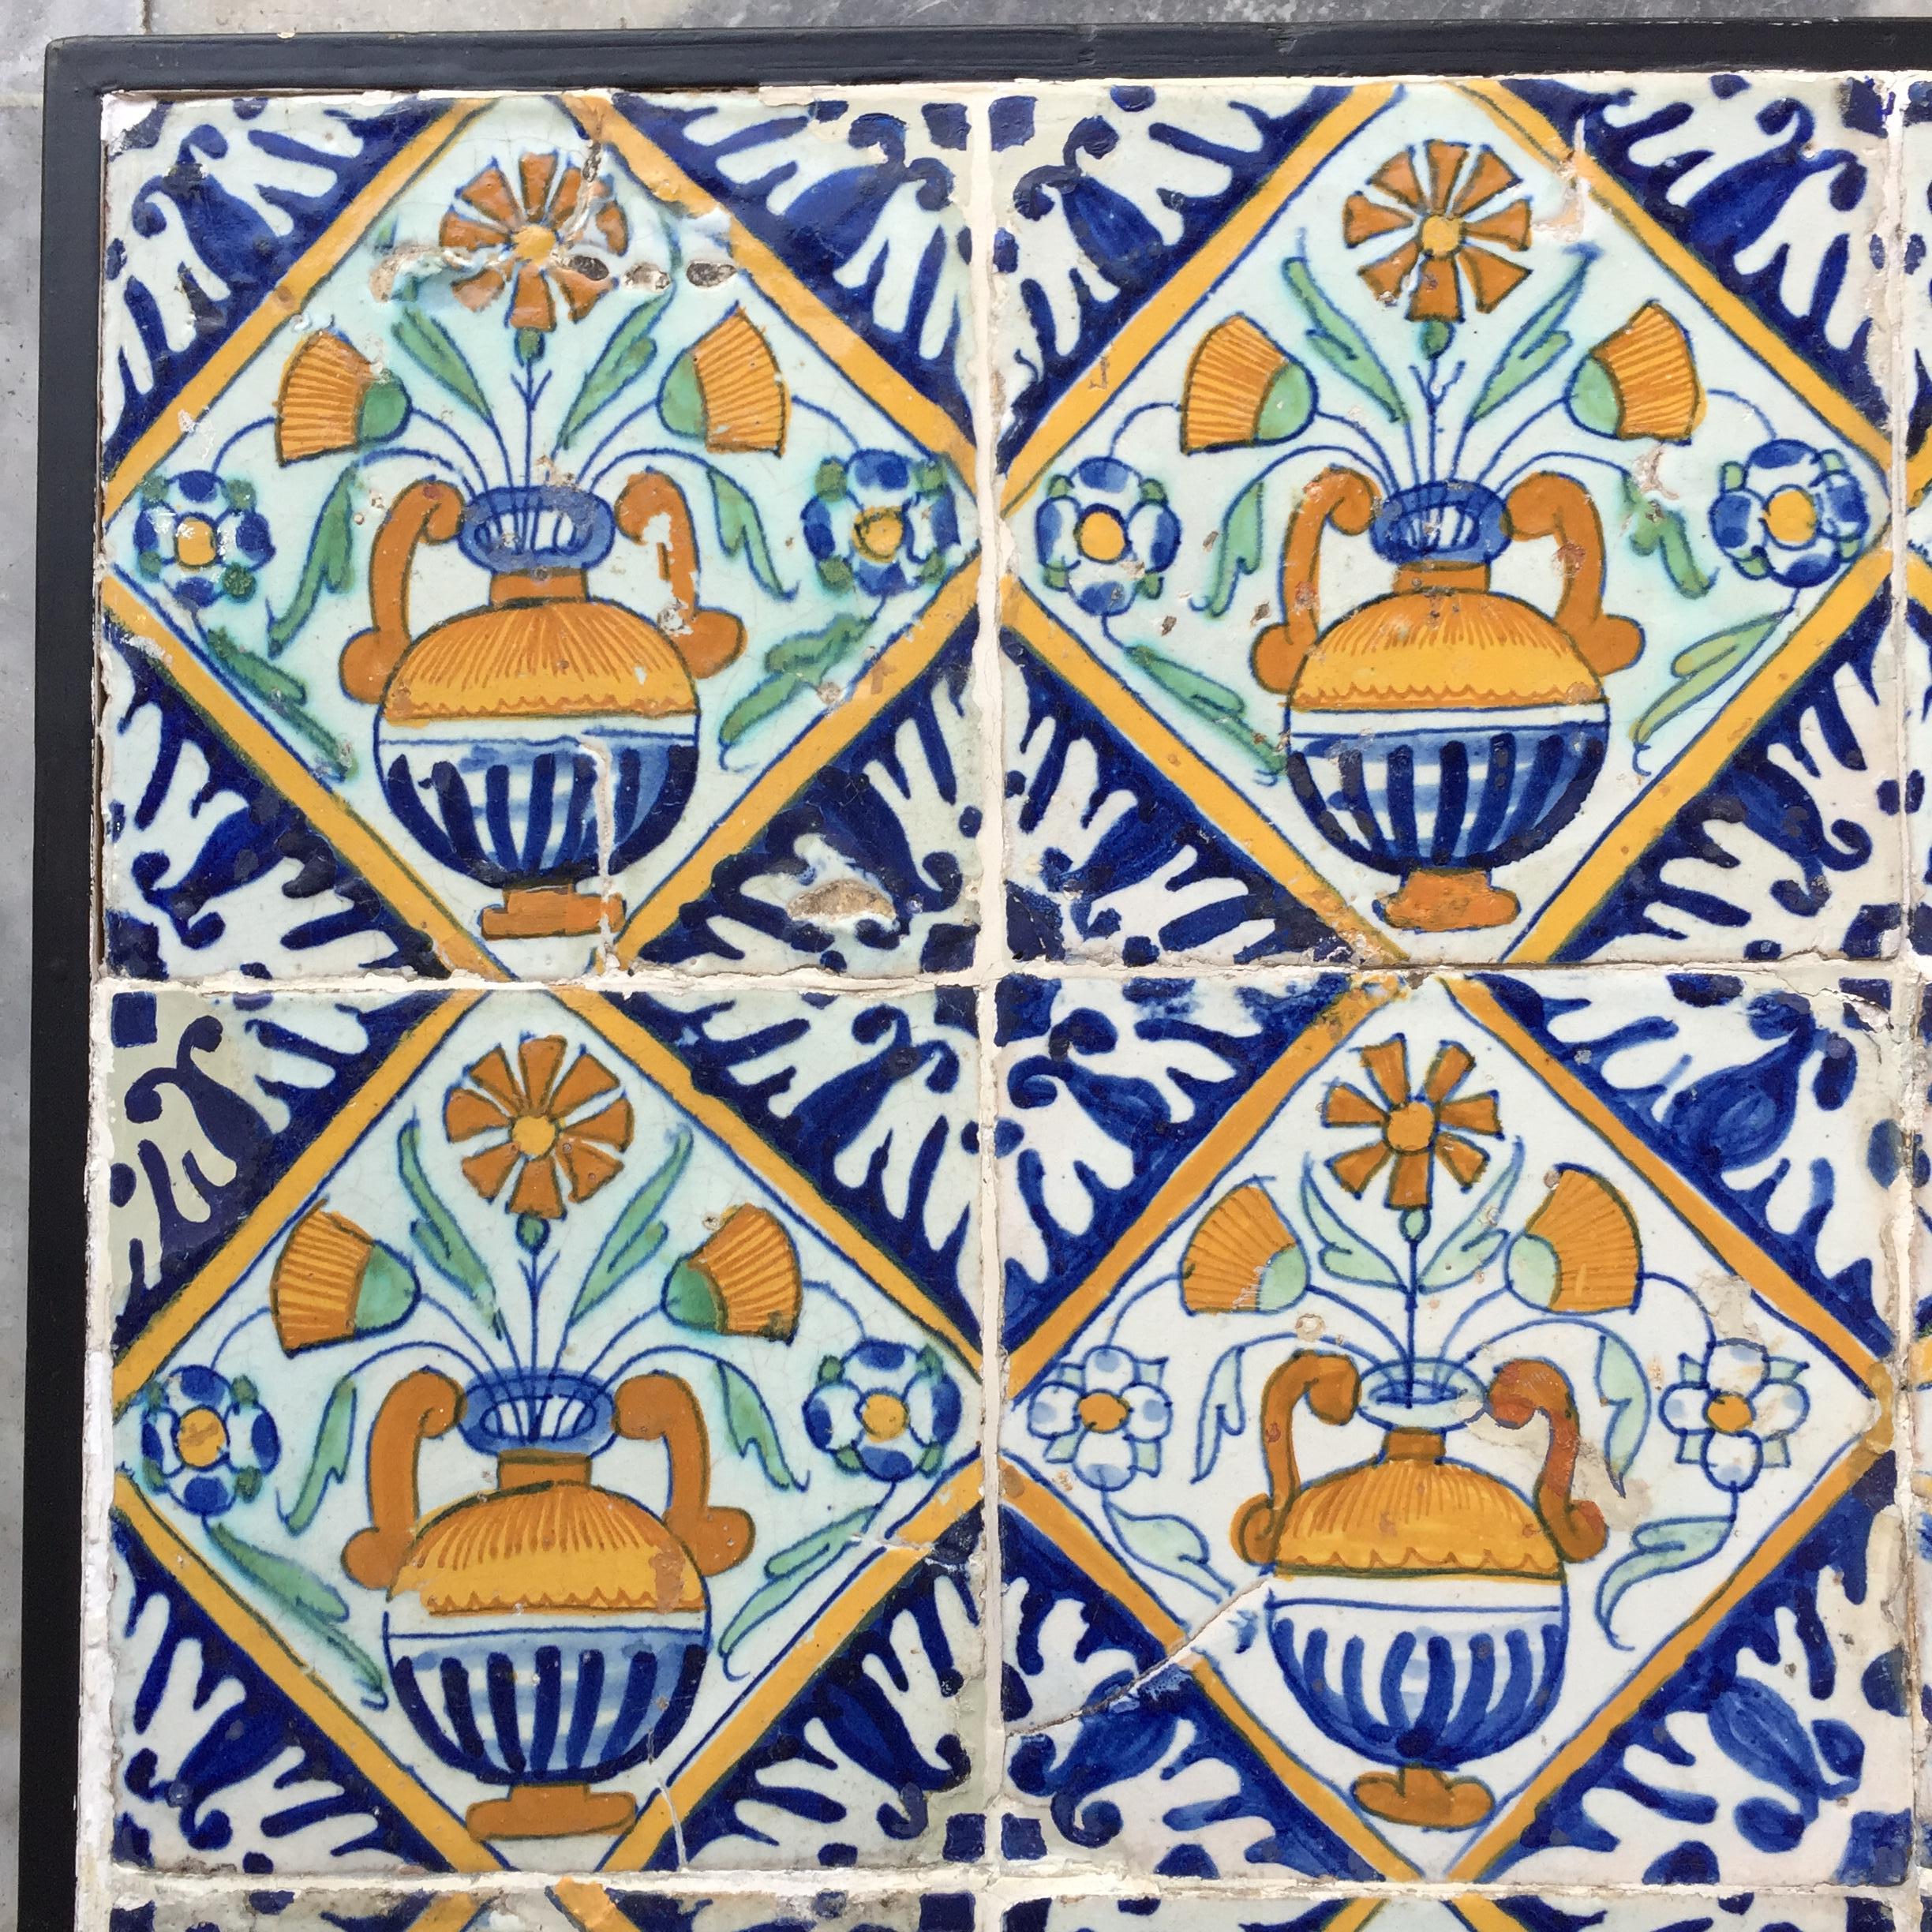 A set of 9 polychrome Dutch Delft tiles with flower vases. 
Made in The Netherlands.
Circa 1600 - 1620.

A wonderful set of 9 tiles with flower vases painted in a quadrant or diamond.
Early polychrome Dutch tiles, on which we can still see some